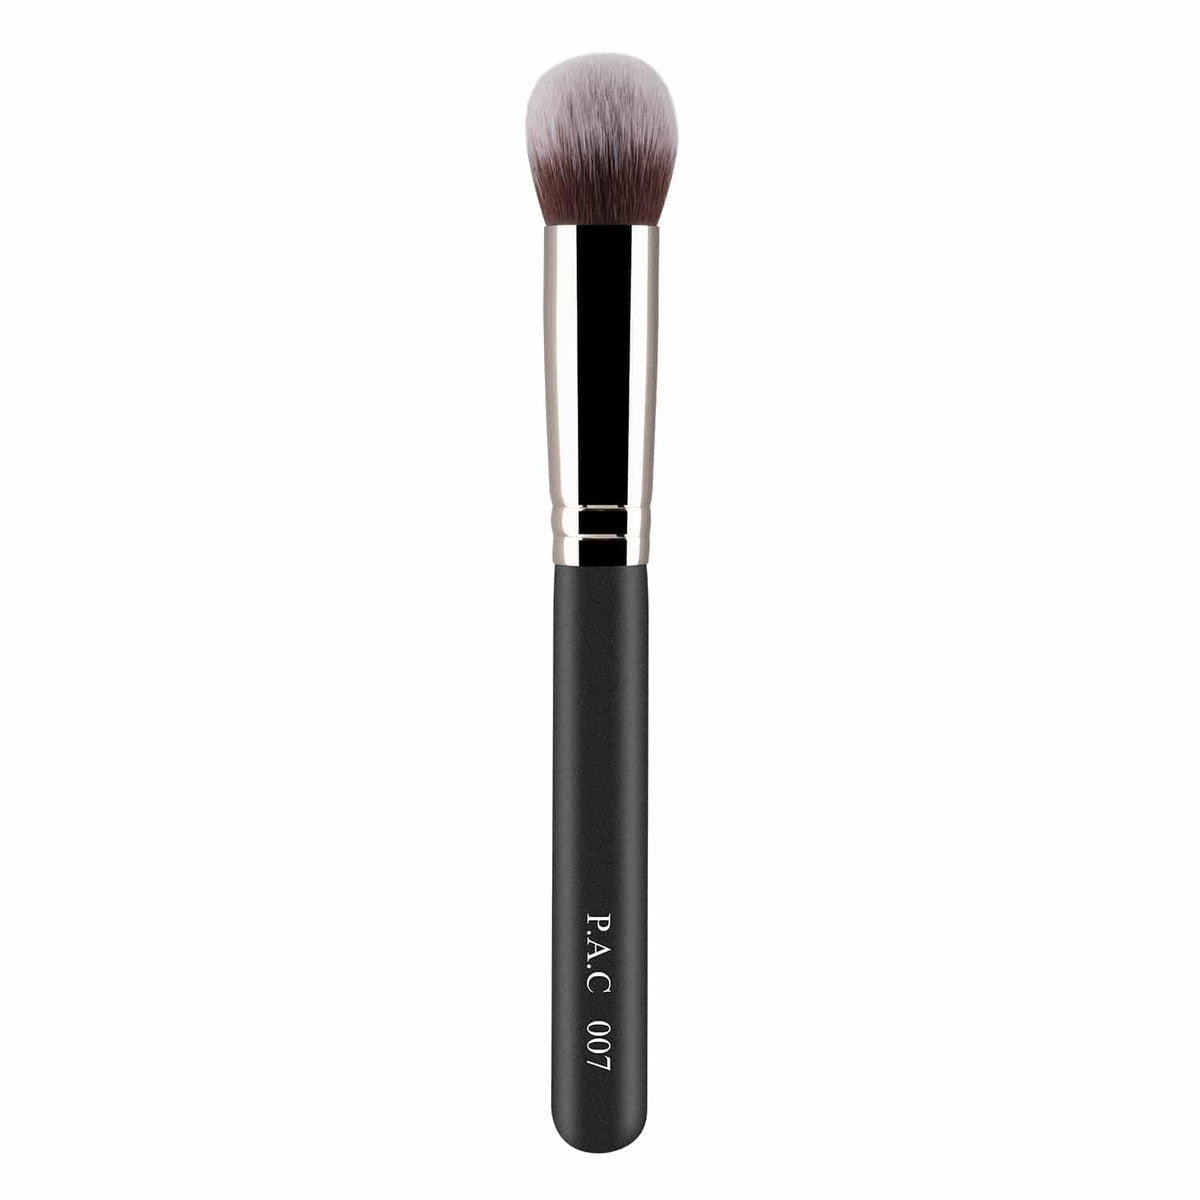 PAC Concealer Brush 007 PAC